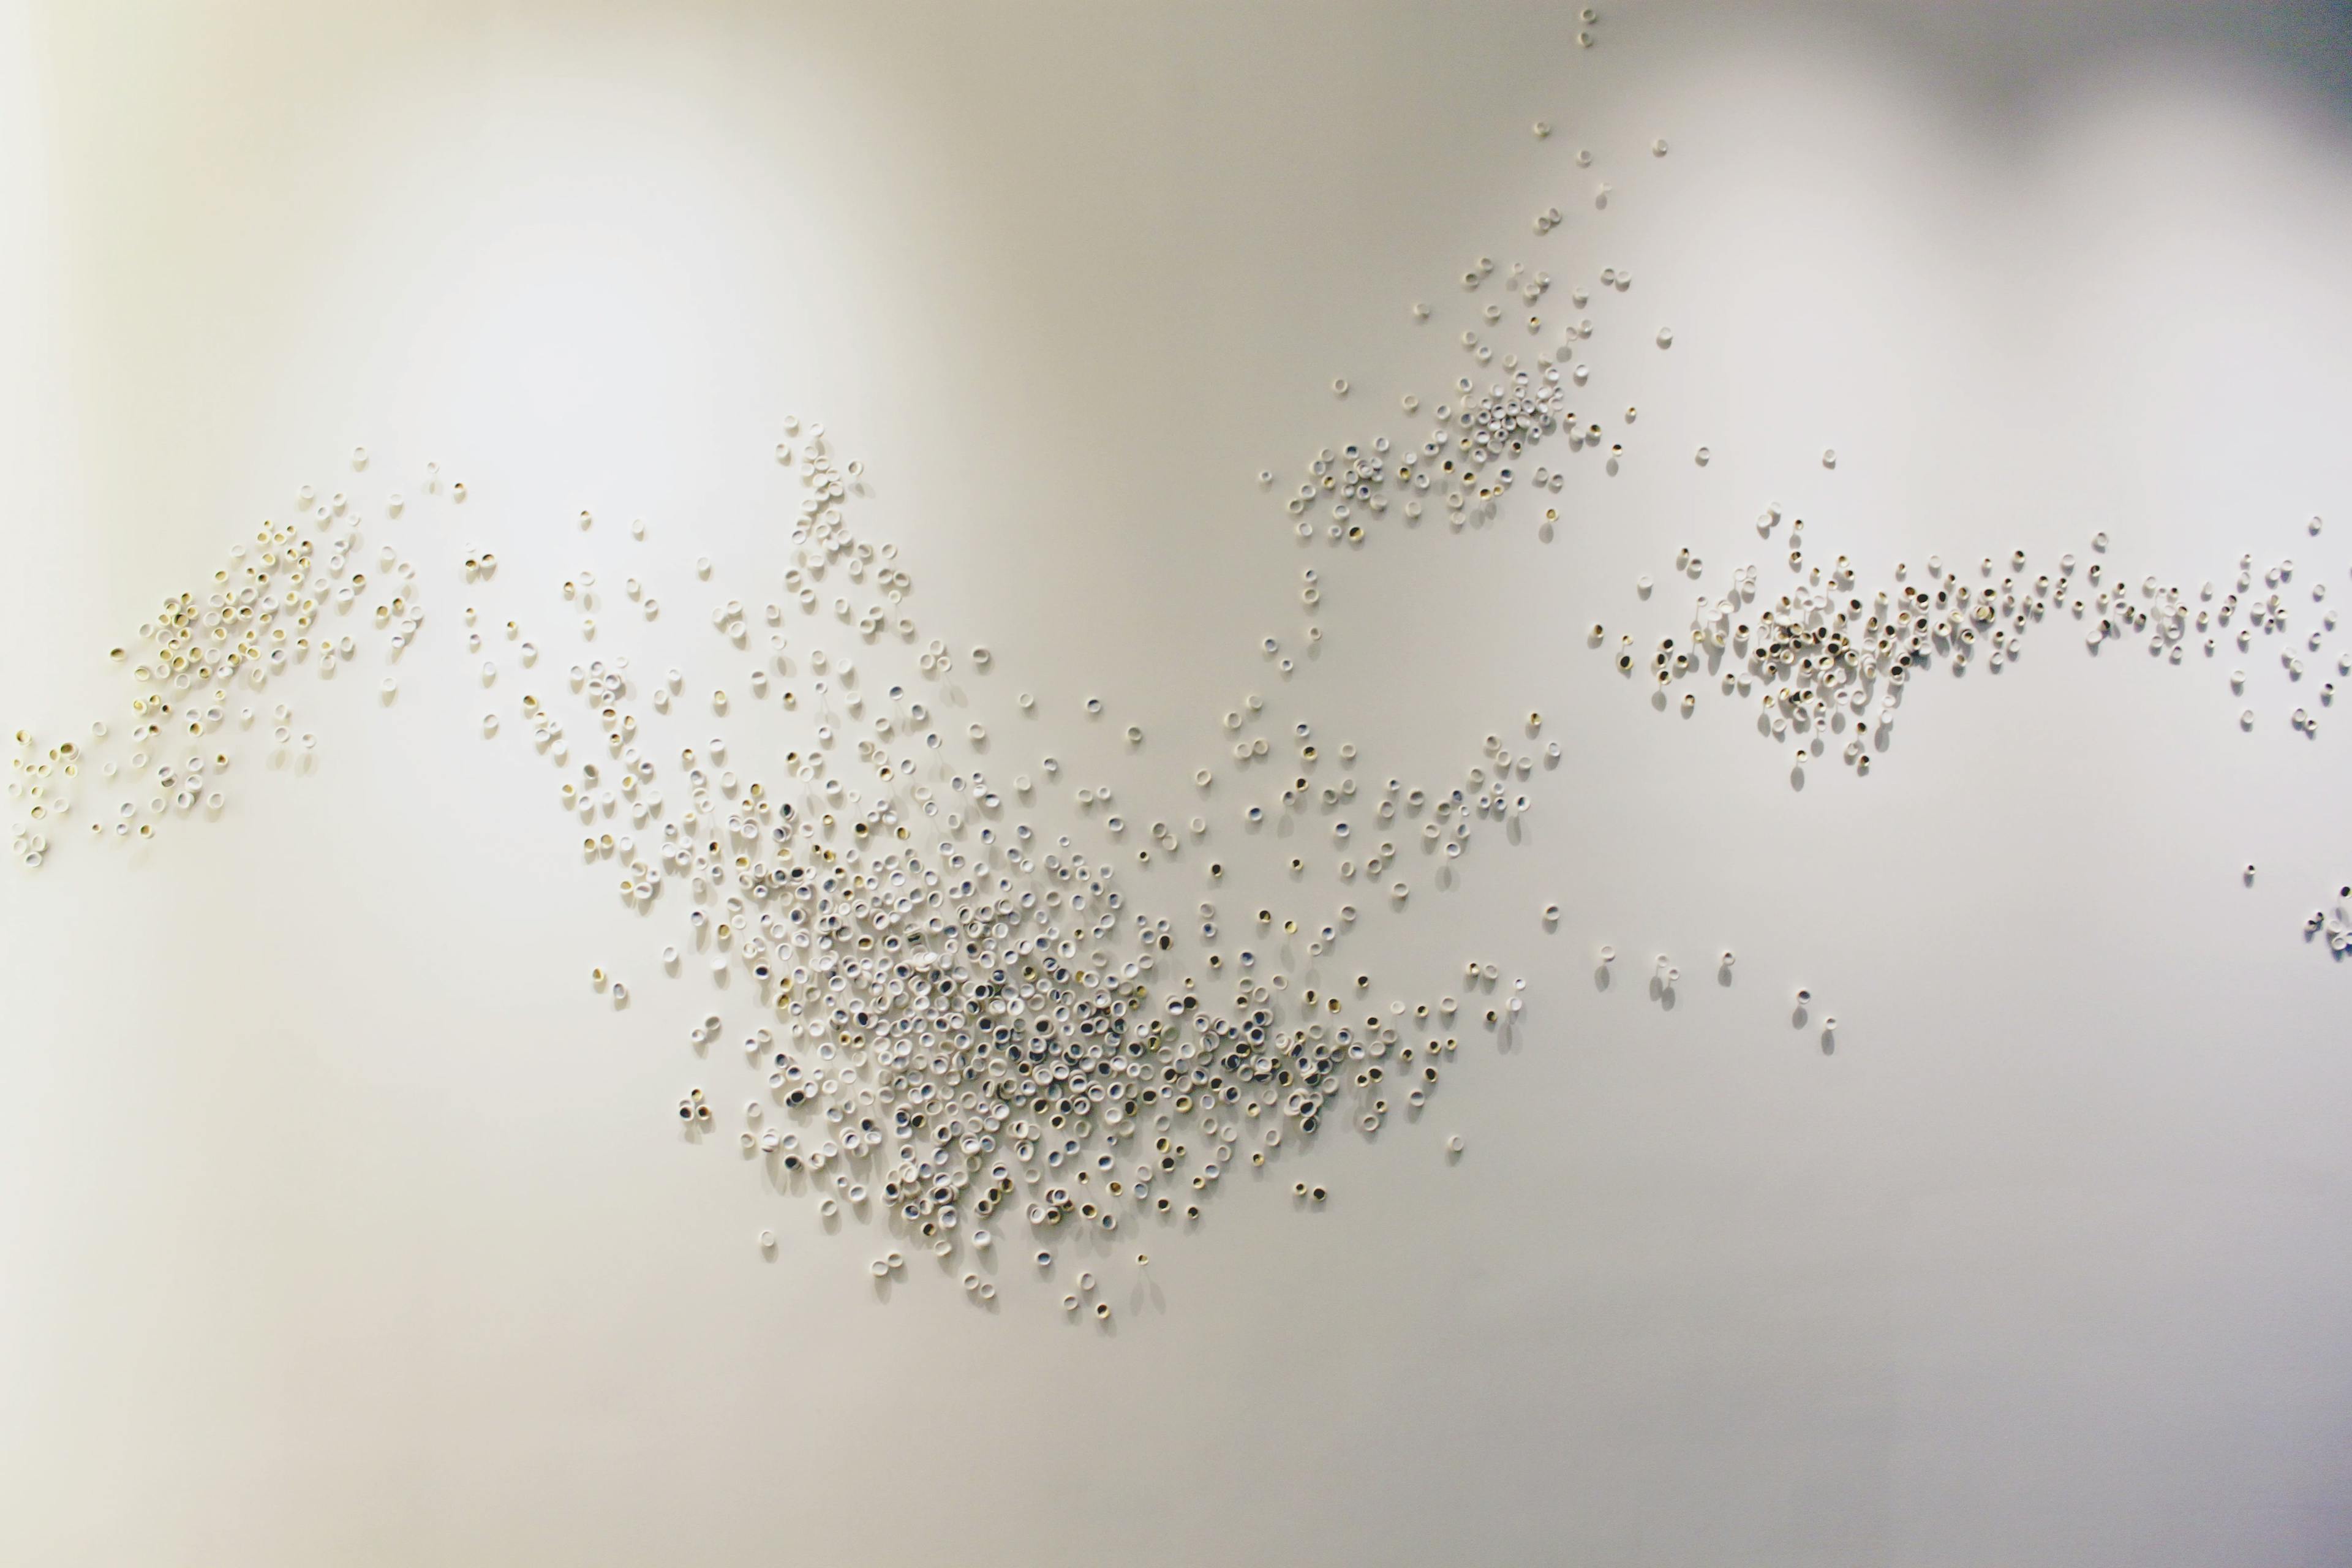 Porcelain wall installation made from small porcelain pieces by artist Christina Watka on a white wall.